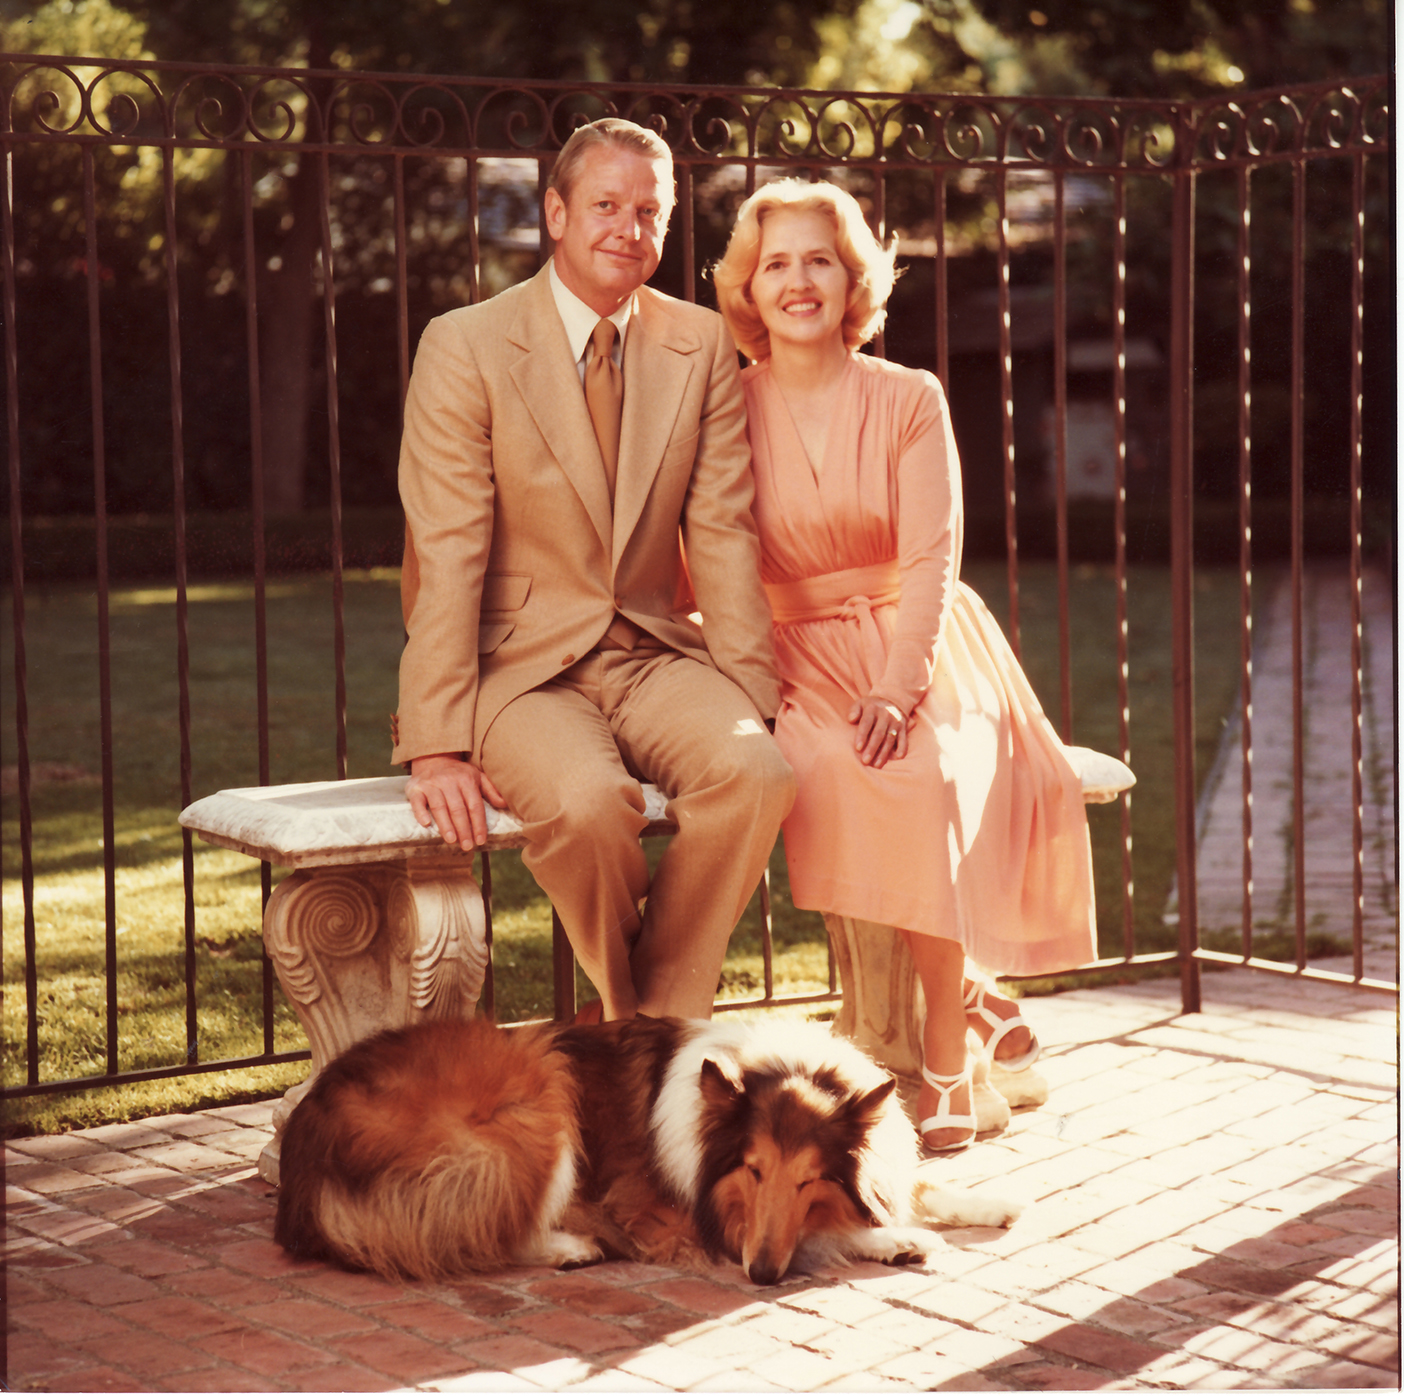 Young Jack and Mary Lois Wheatley pose on a bench with their collie dog.